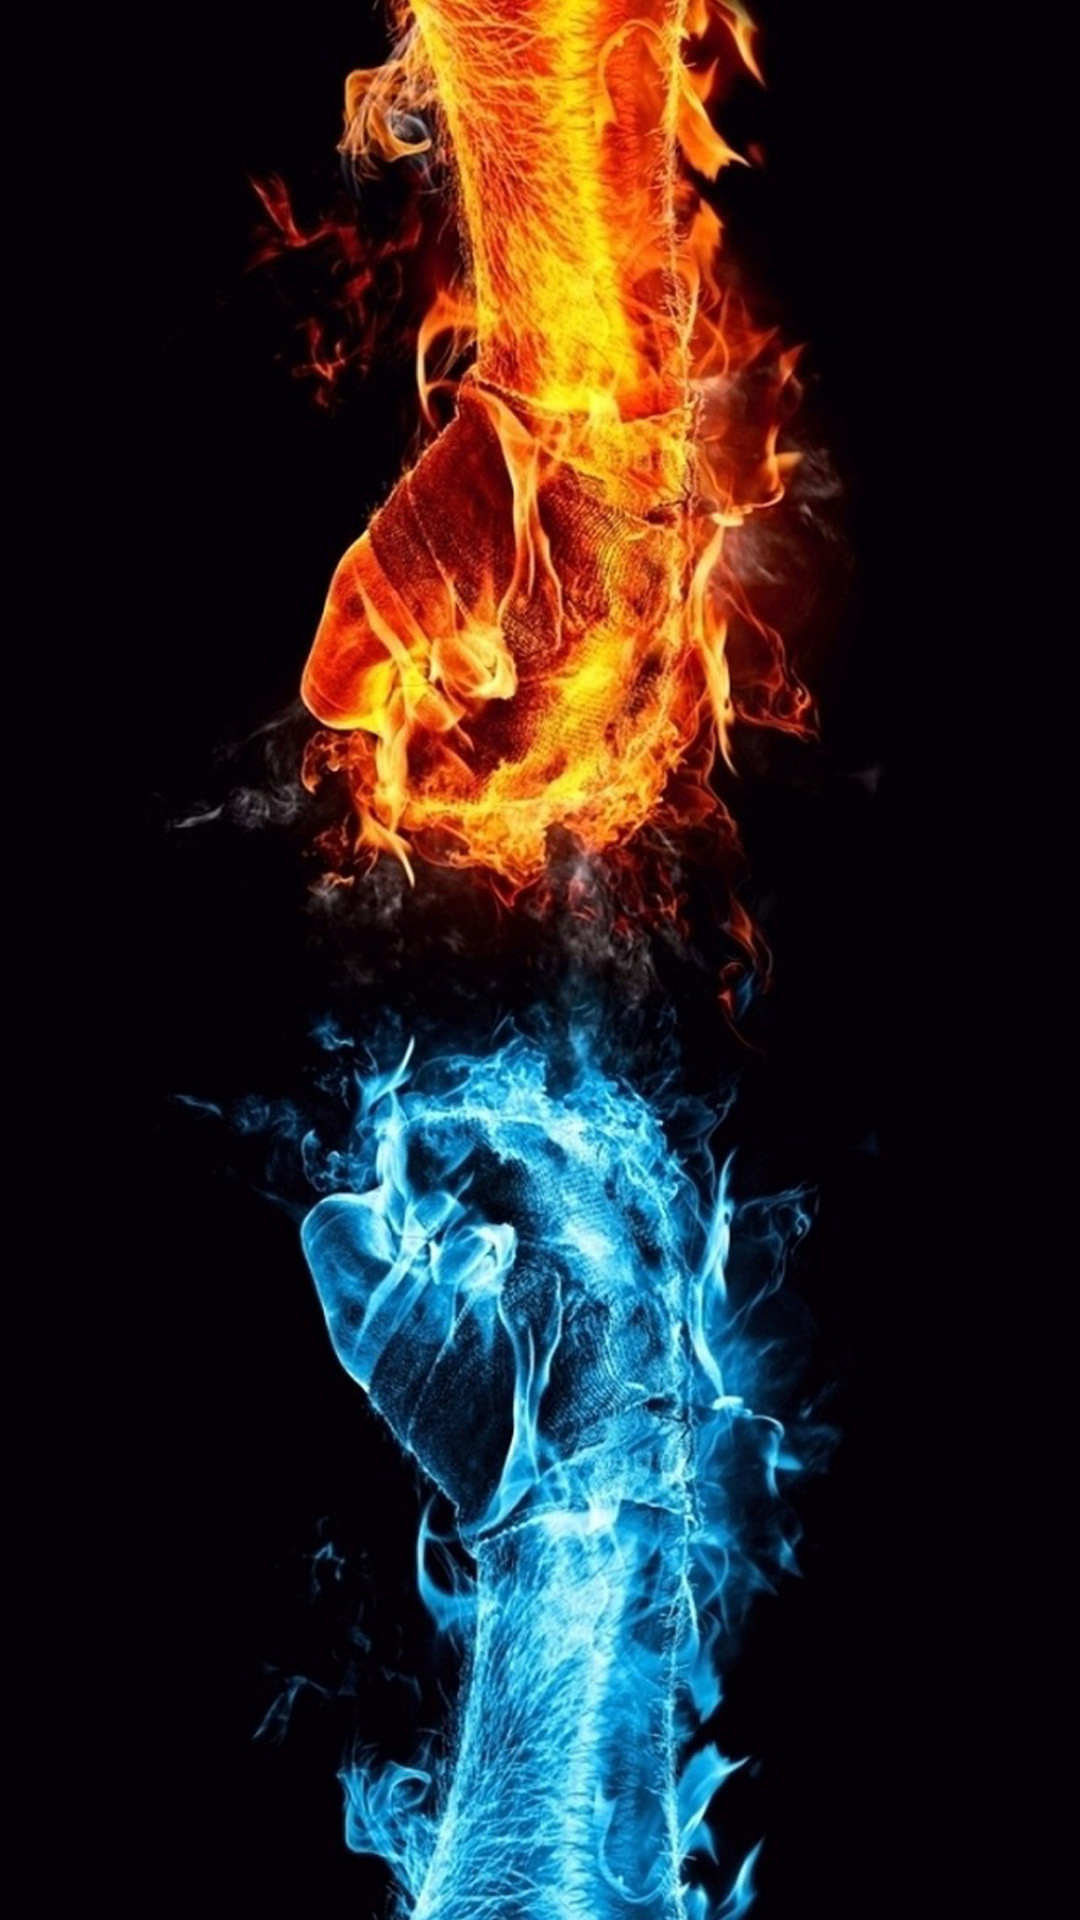 1080x1920 Blue and red fire fist Nexus 5 Wallpapers